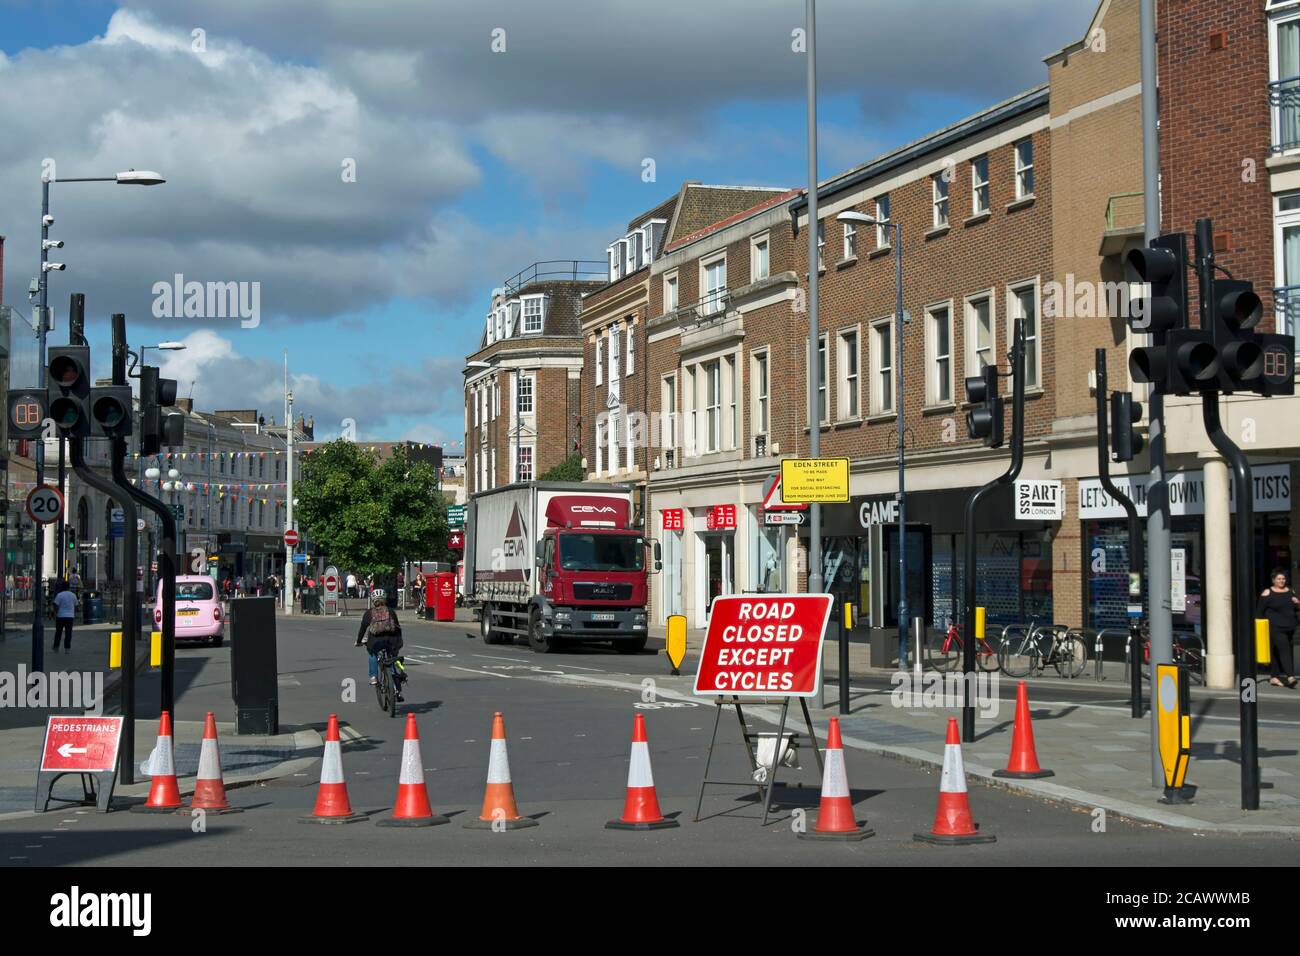 road closure except for cycles, indicated by cones and a sign, in kingston upon thames, surrey, england Stock Photo